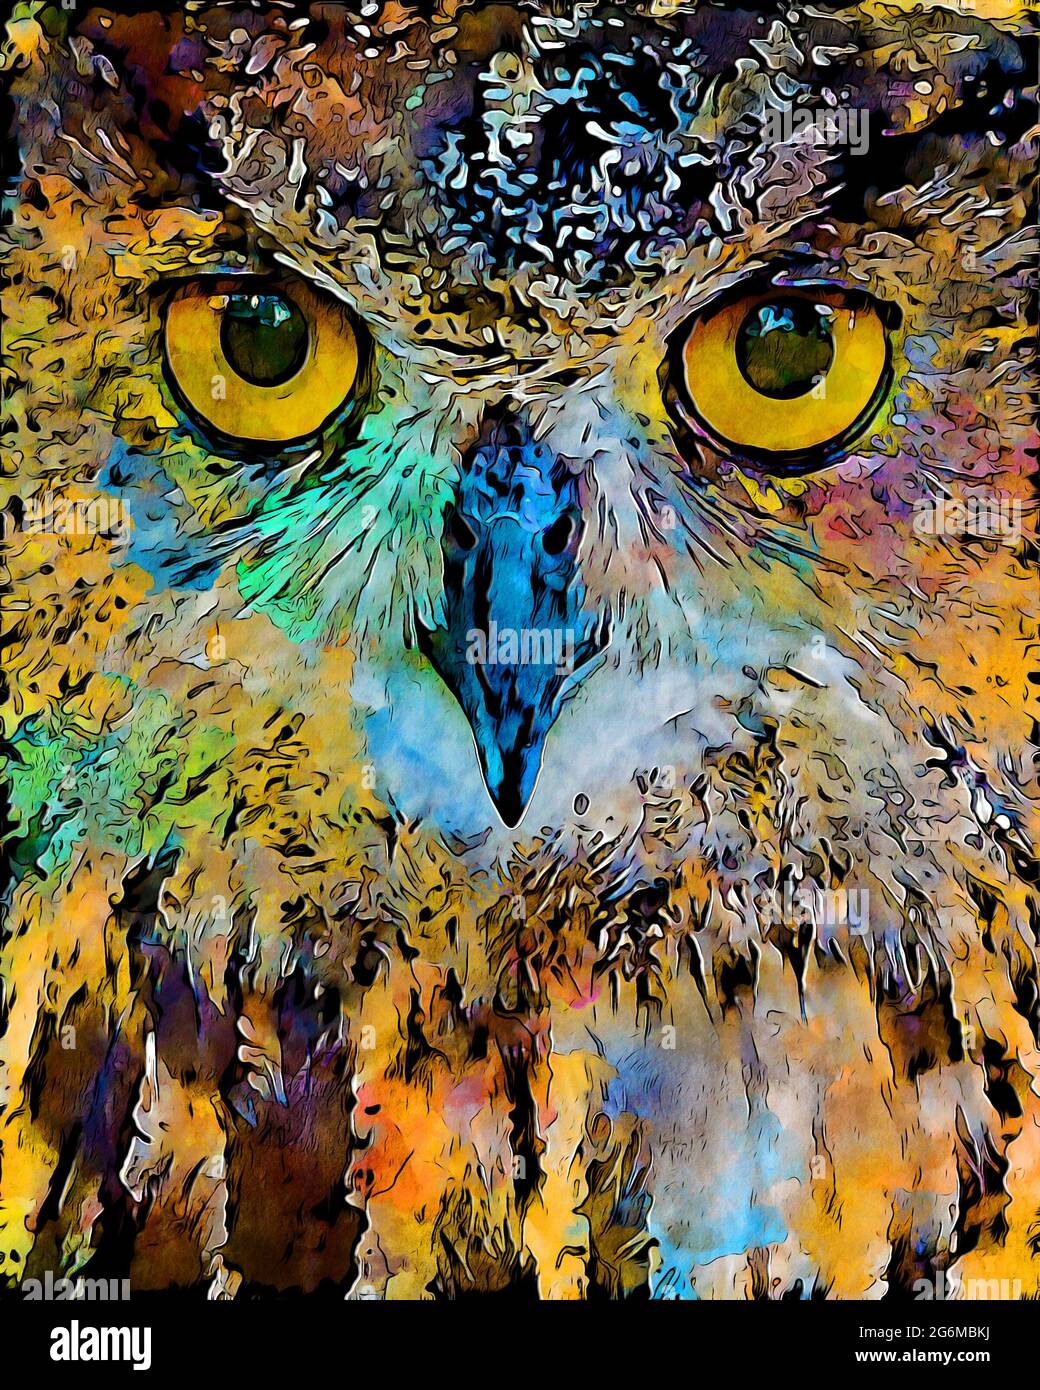 Colorful digital painting close-up portrait of an owl making eye contact Stock Photo